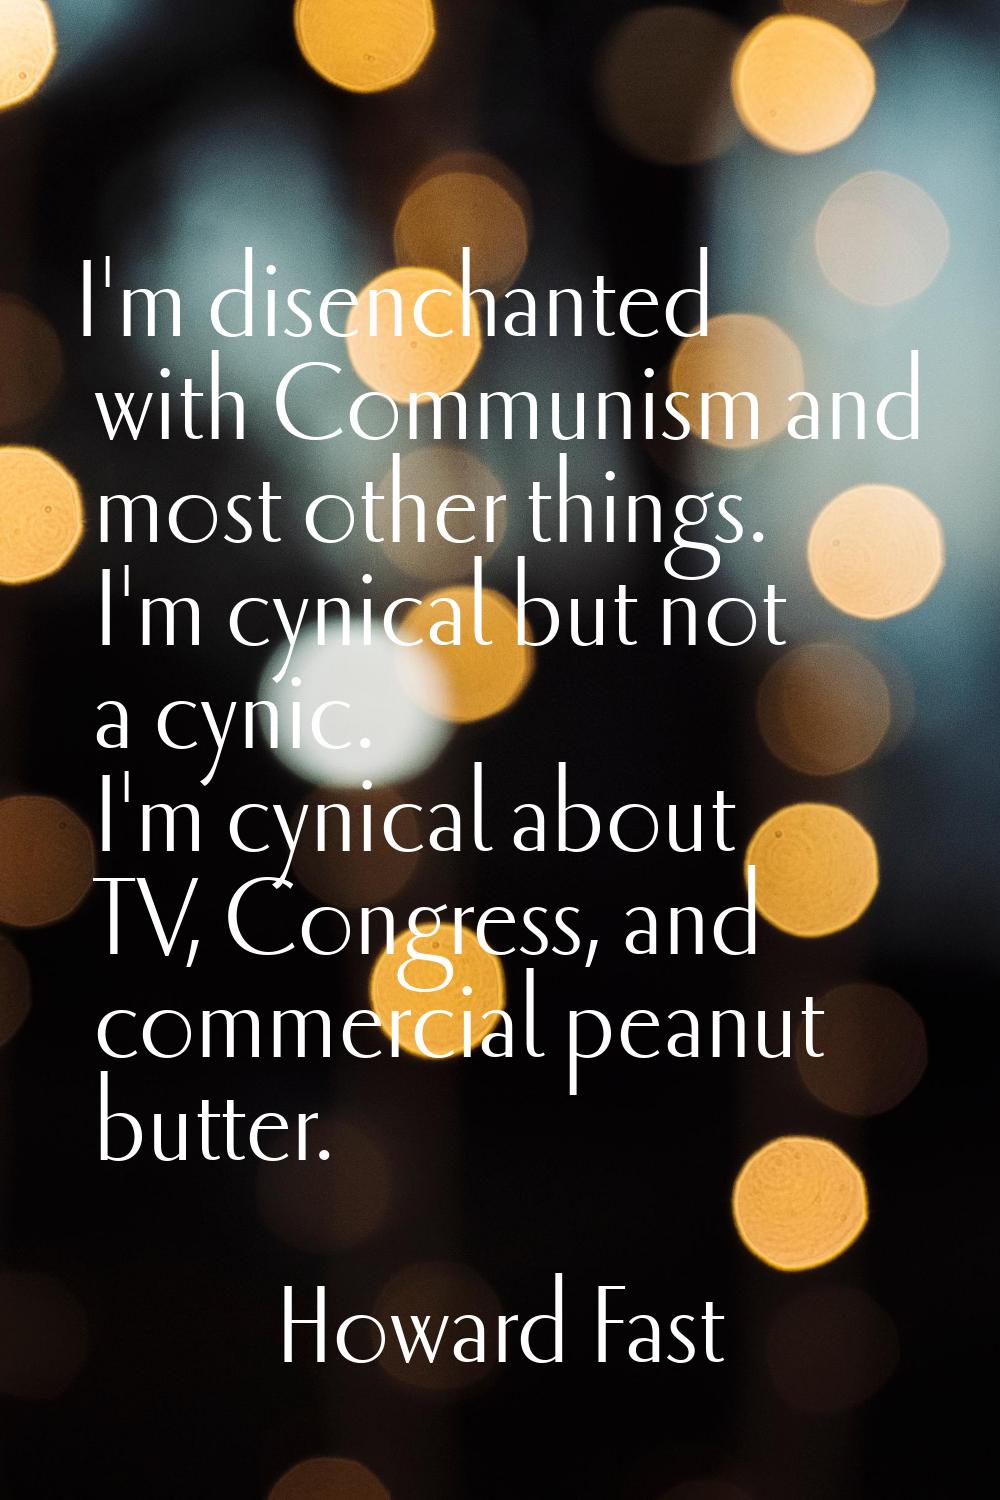 I'm disenchanted with Communism and most other things. I'm cynical but not a cynic. I'm cynical abo